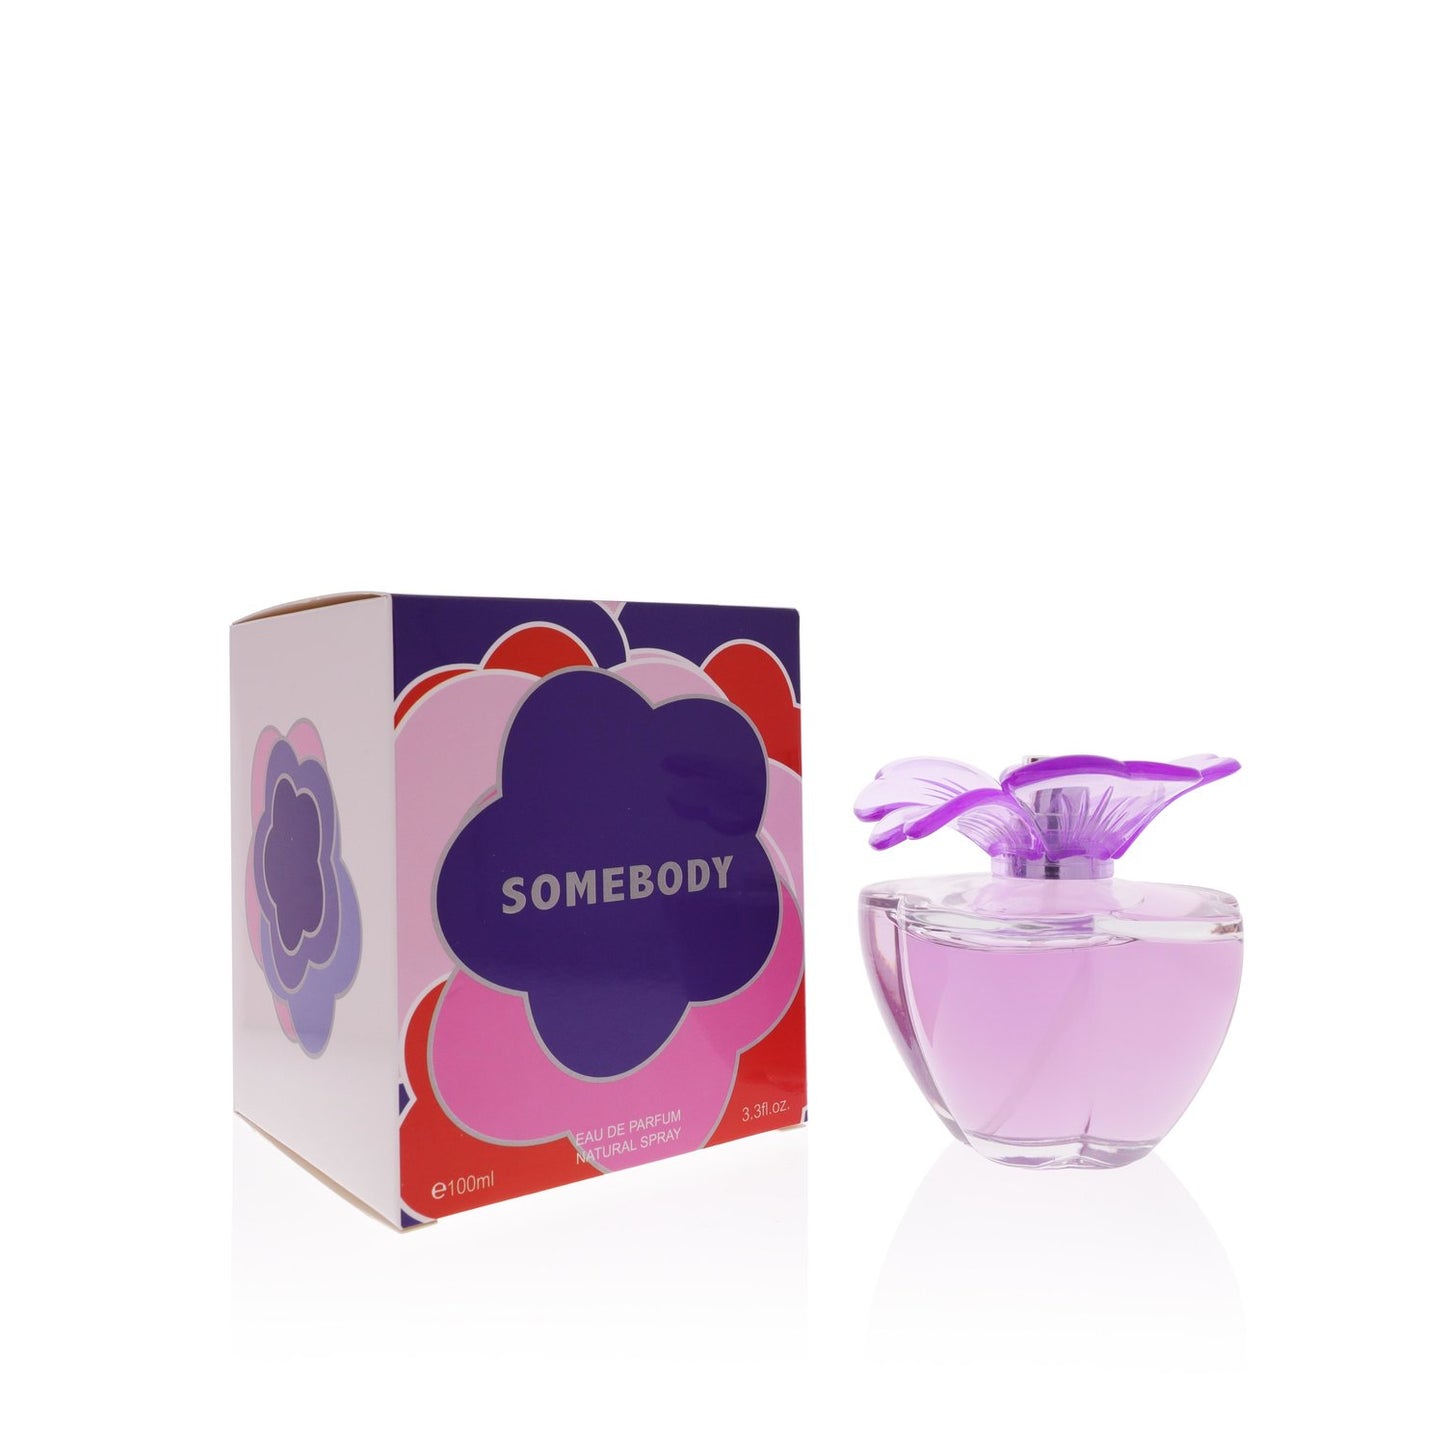 Somebody Women's Fragrance: Embrace the Captivating Allure of this Unique and Irresistible Scent - A Must-Have for the Modern Woman's Signature Collection!